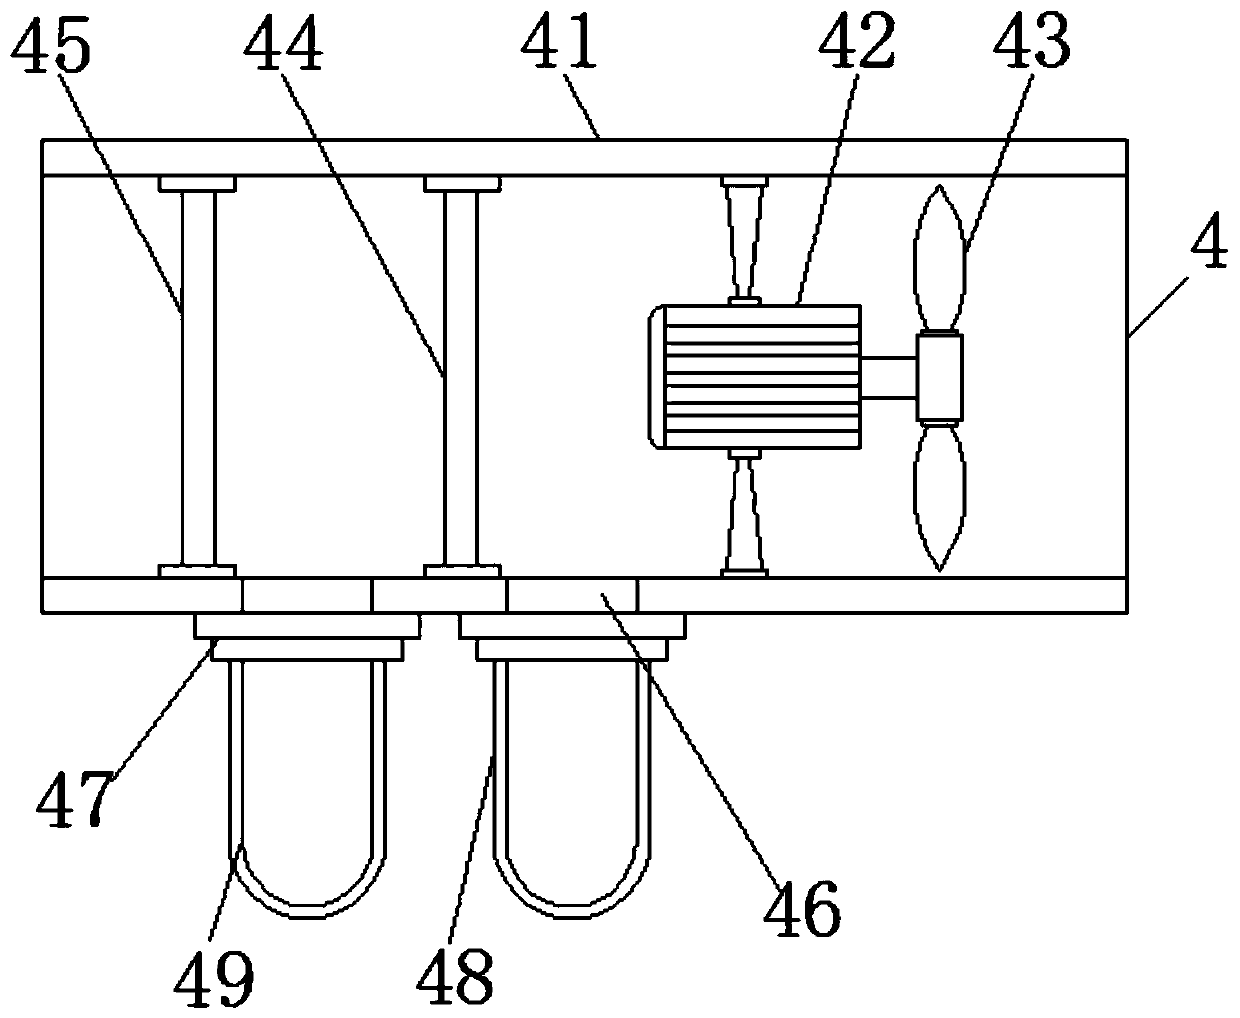 An impurity removal and drying device for agricultural grain